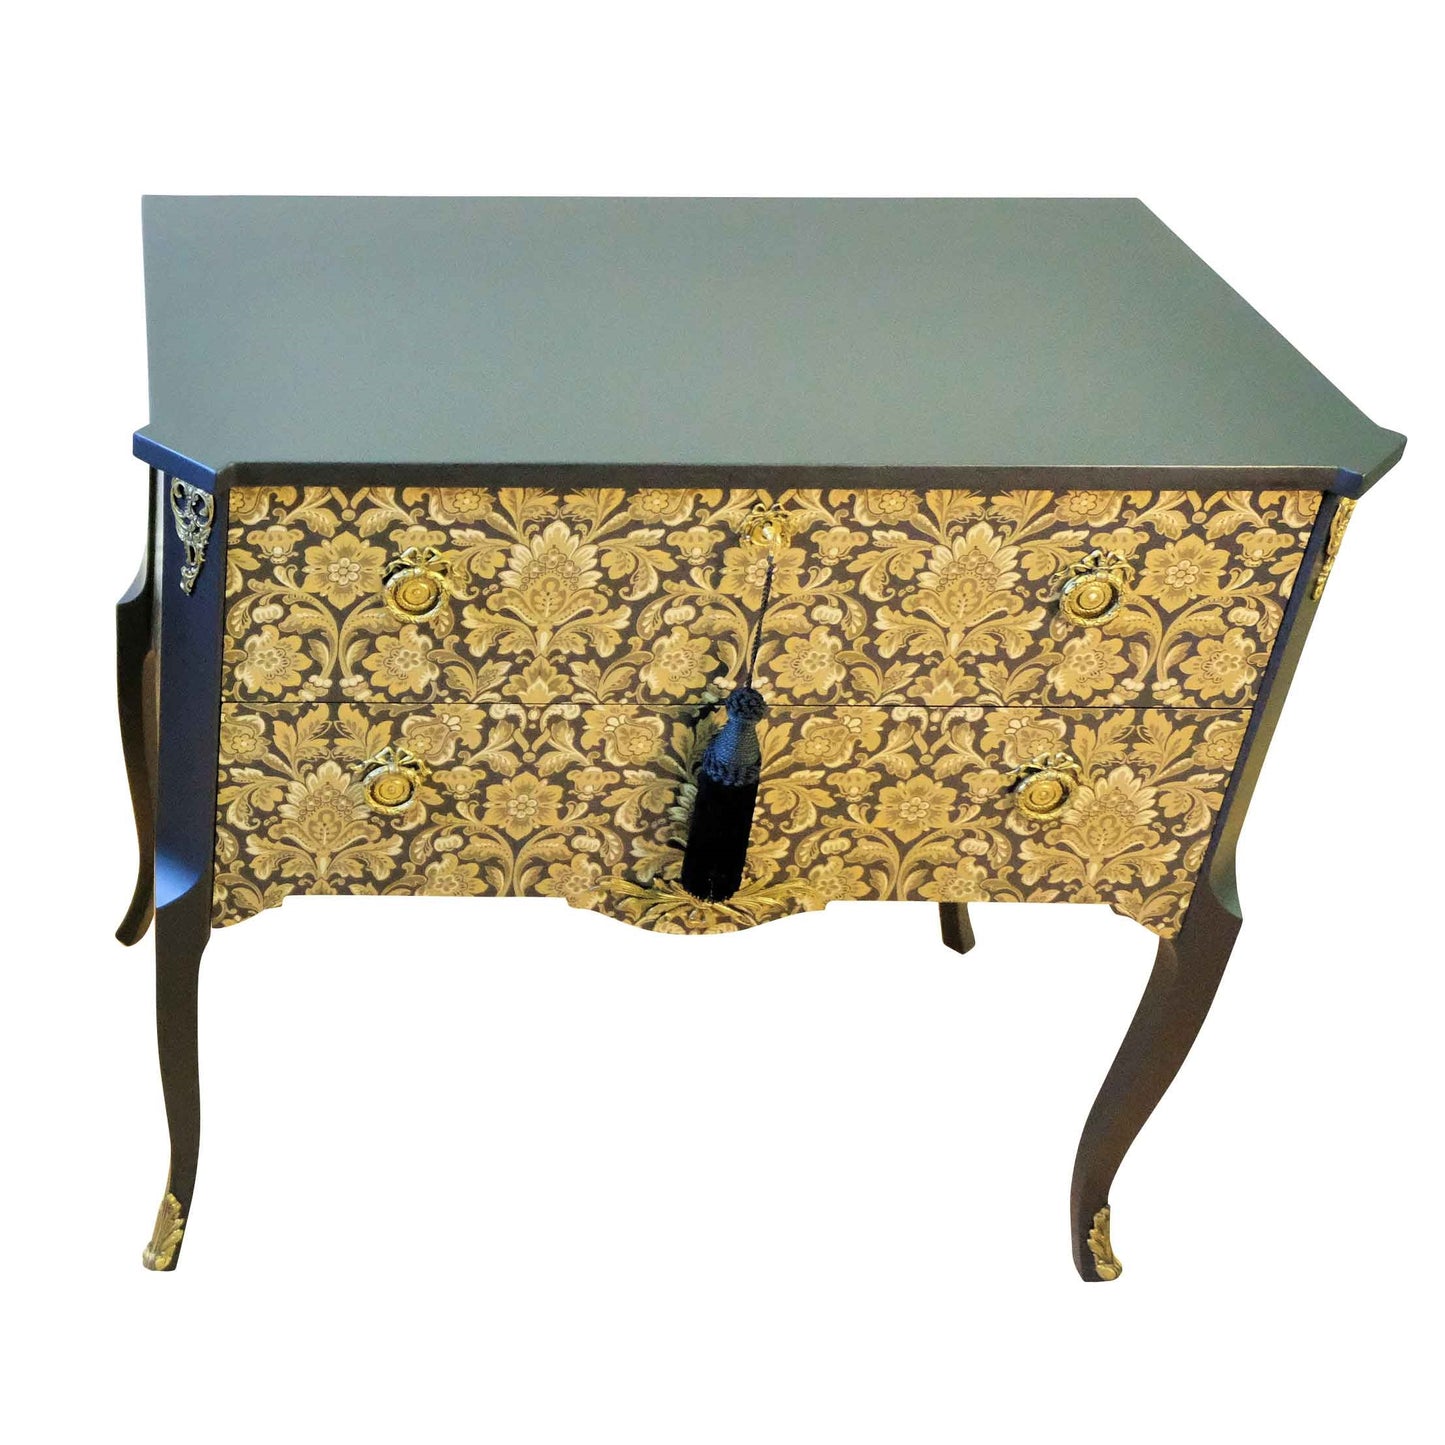 (720) Gustavian Style Commode with Floral Design (Single)